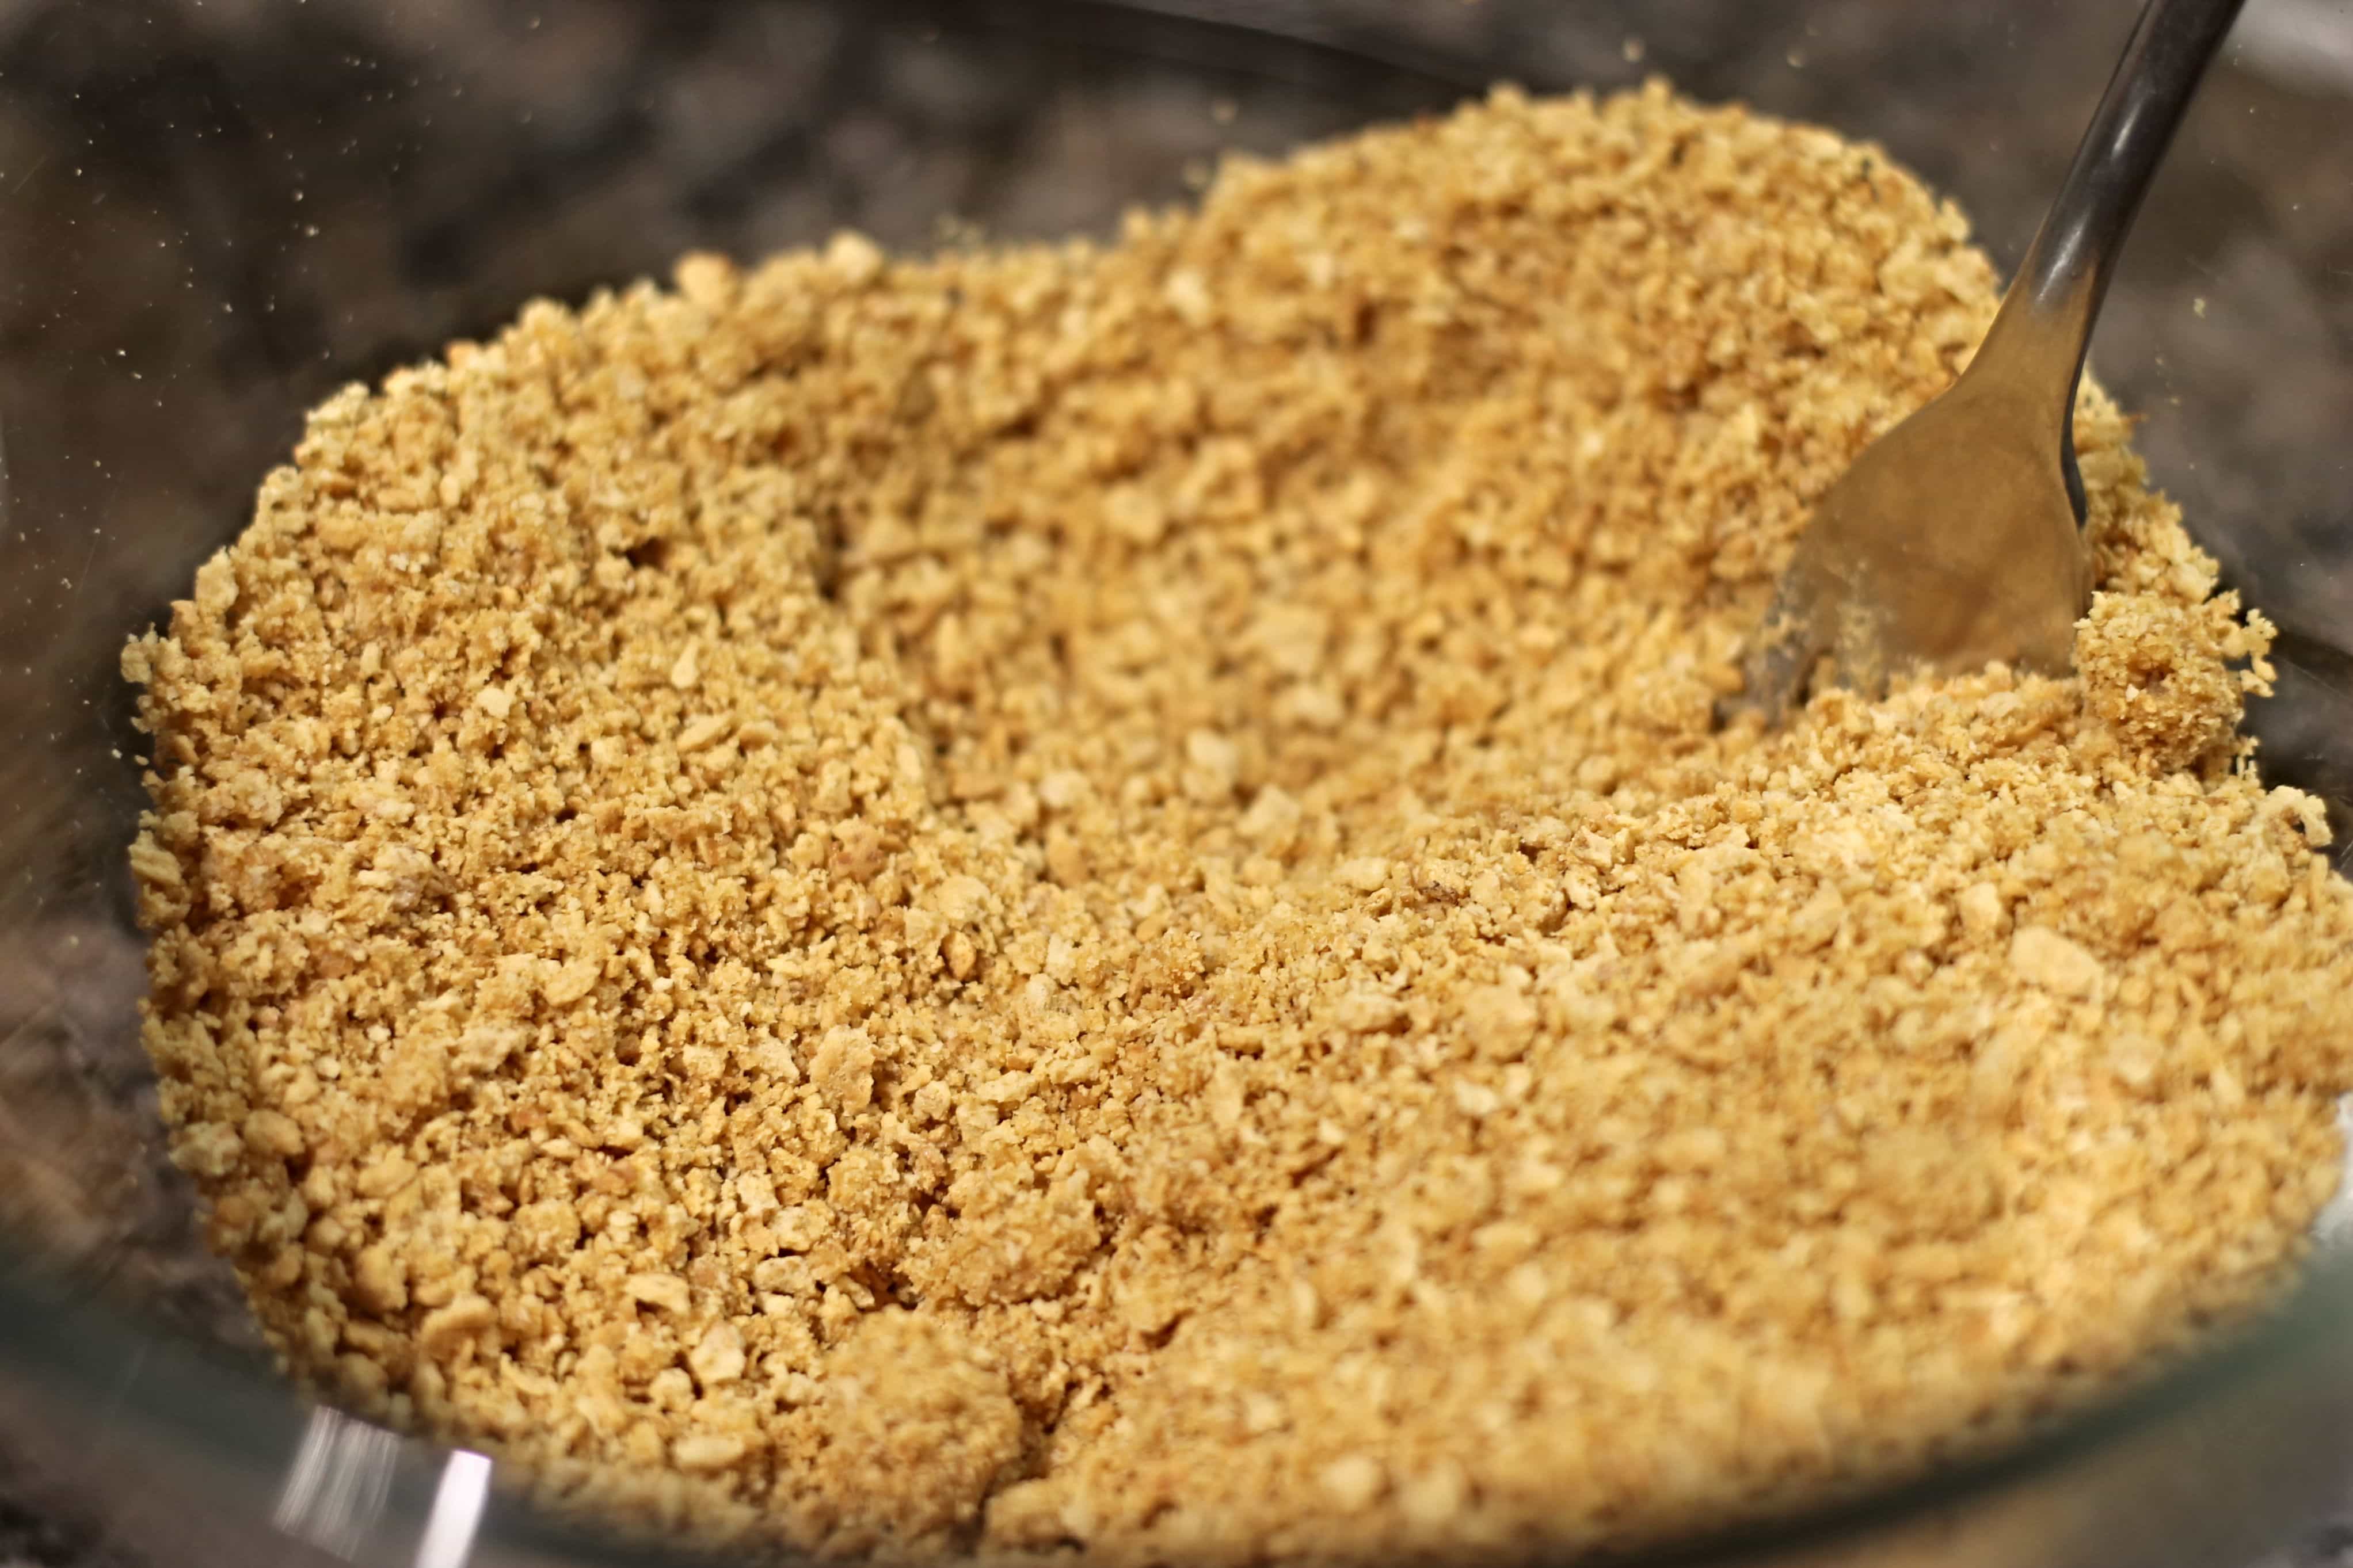 Graham cracker crumbs for base of Toffee Bars